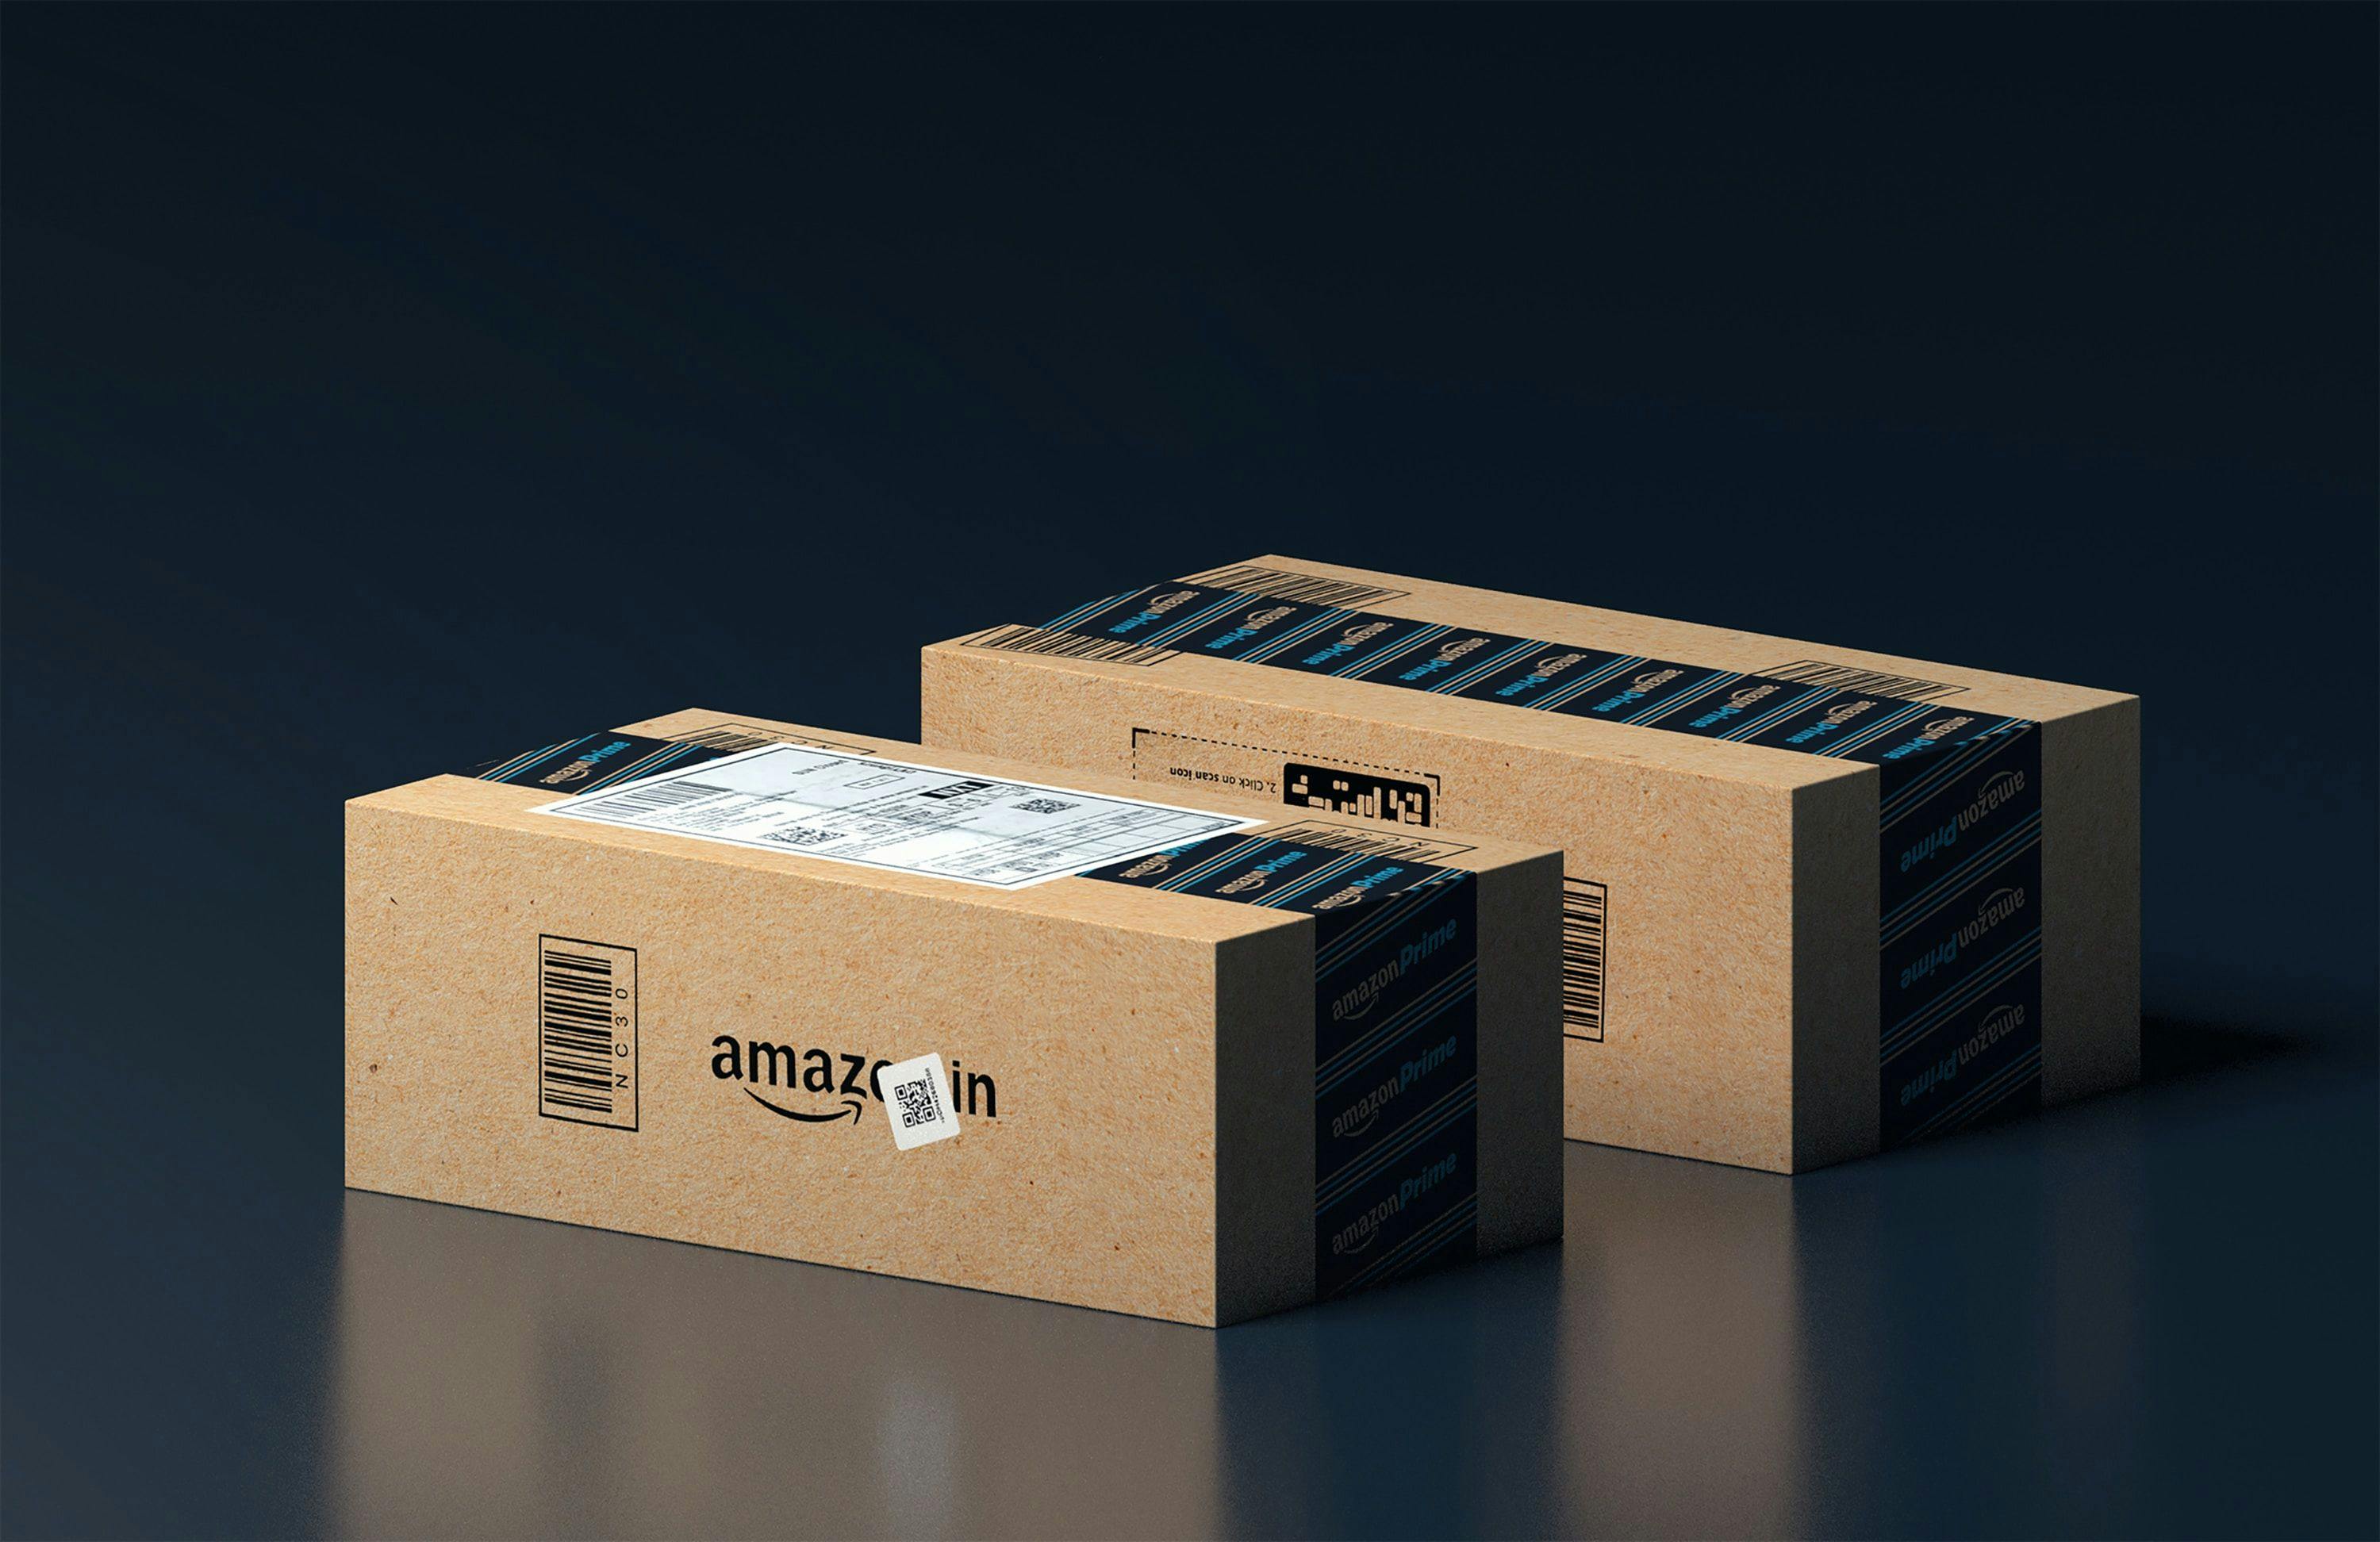 Cover Image for How to Return Items to Amazon from Singapore: Step-by-Step Guide